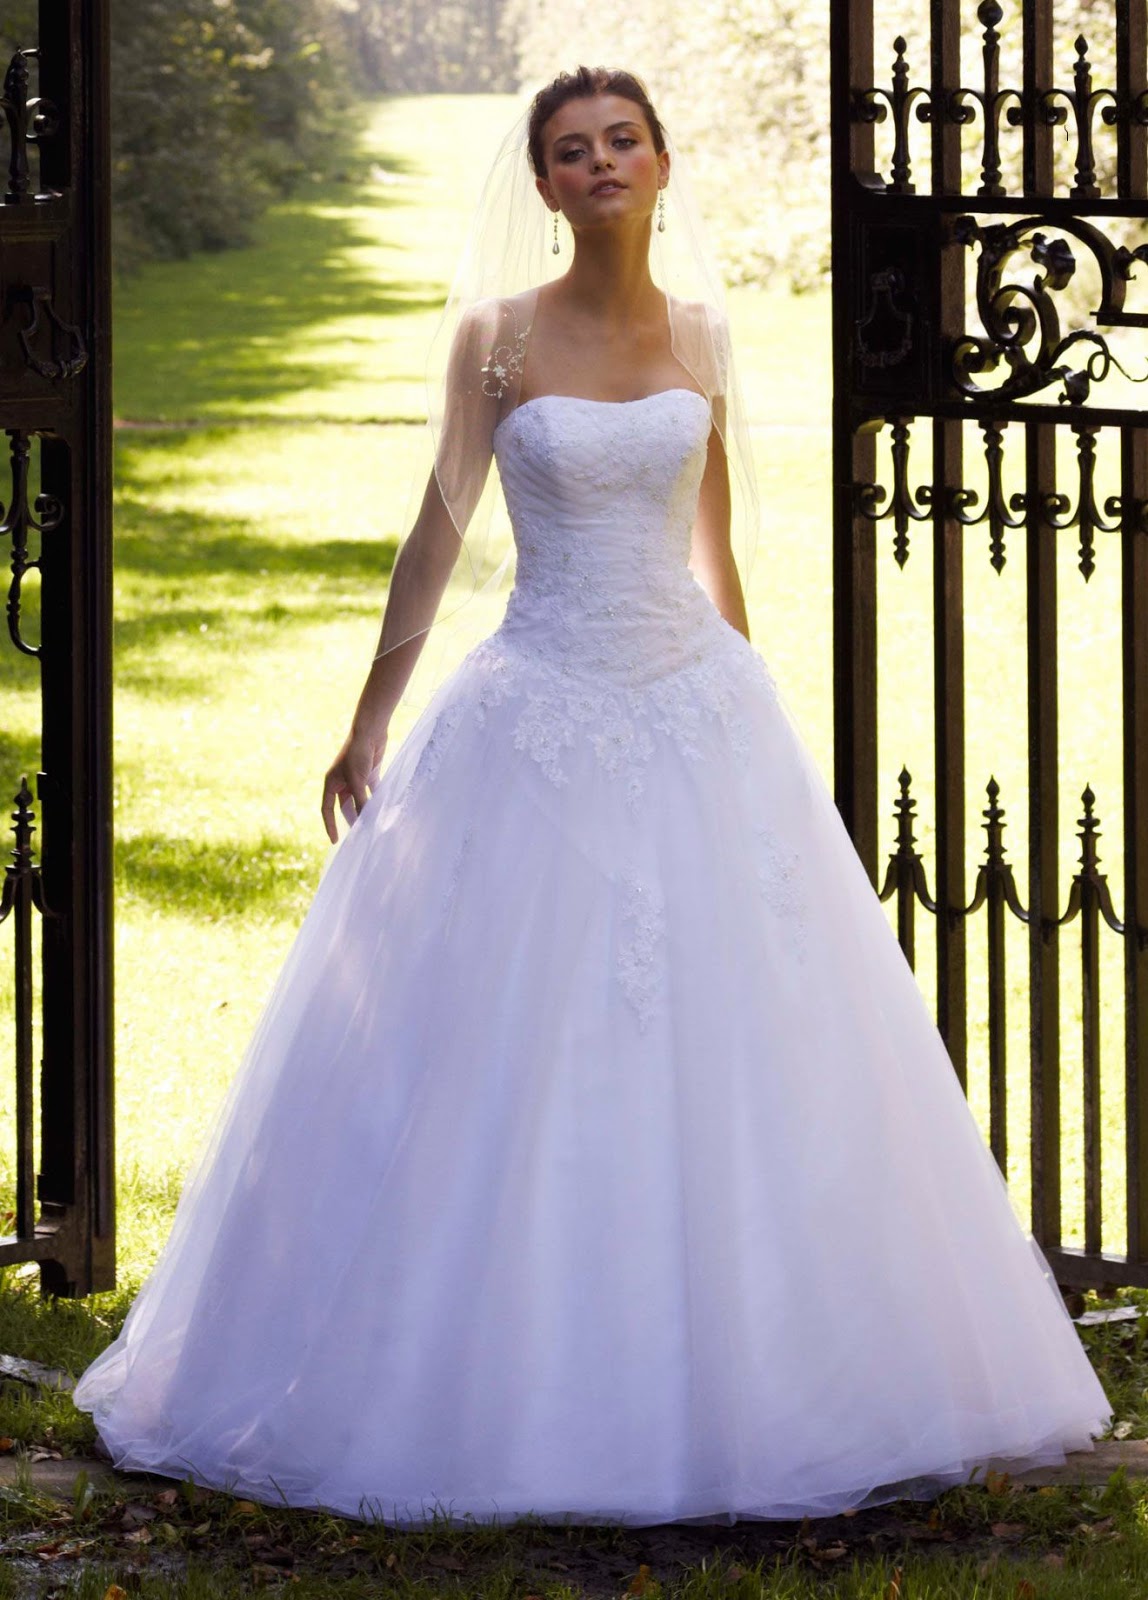 2016 Wedding Dresses and Trends: David’s Bridal collection